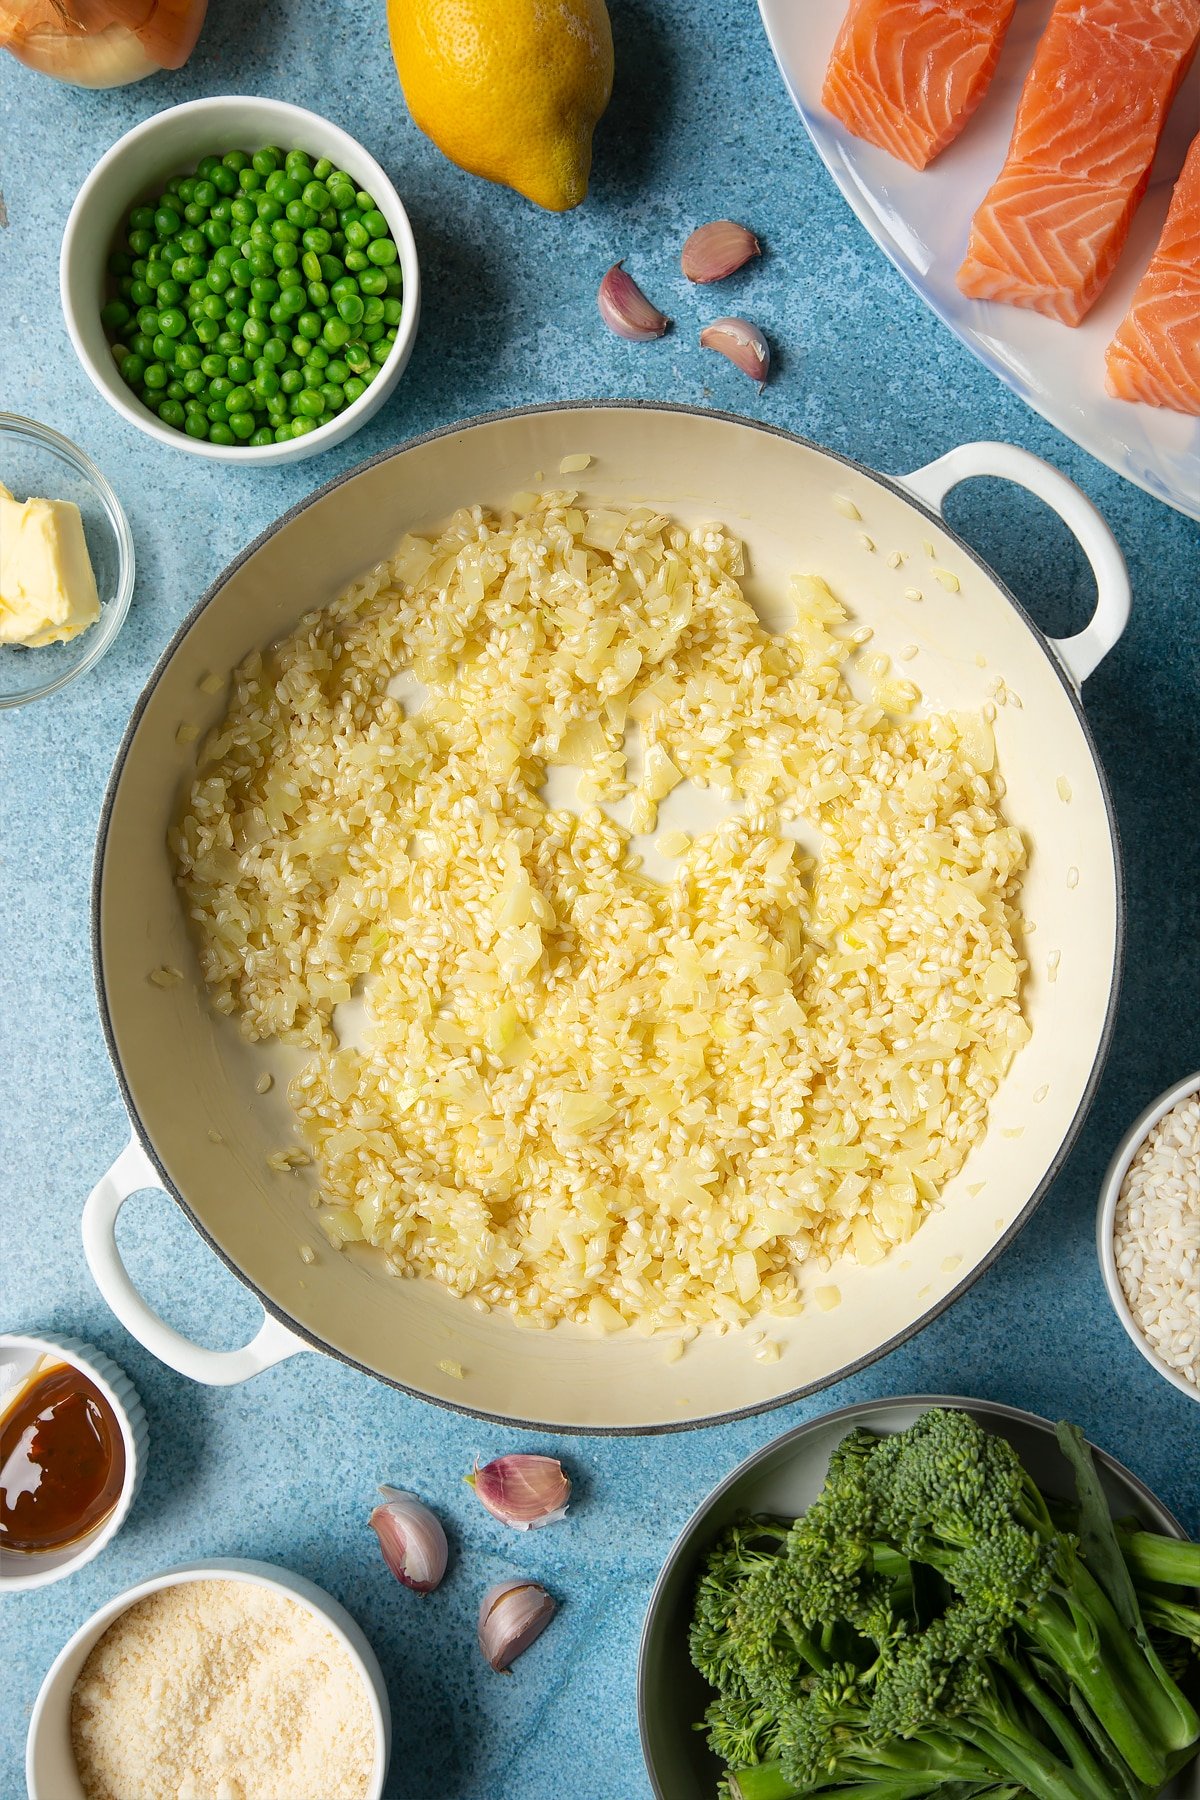 Onions, garlic, butter and arborio rice mixed together in a large cream-colour pan. Ingredients to make salmon risotto surround the pan.